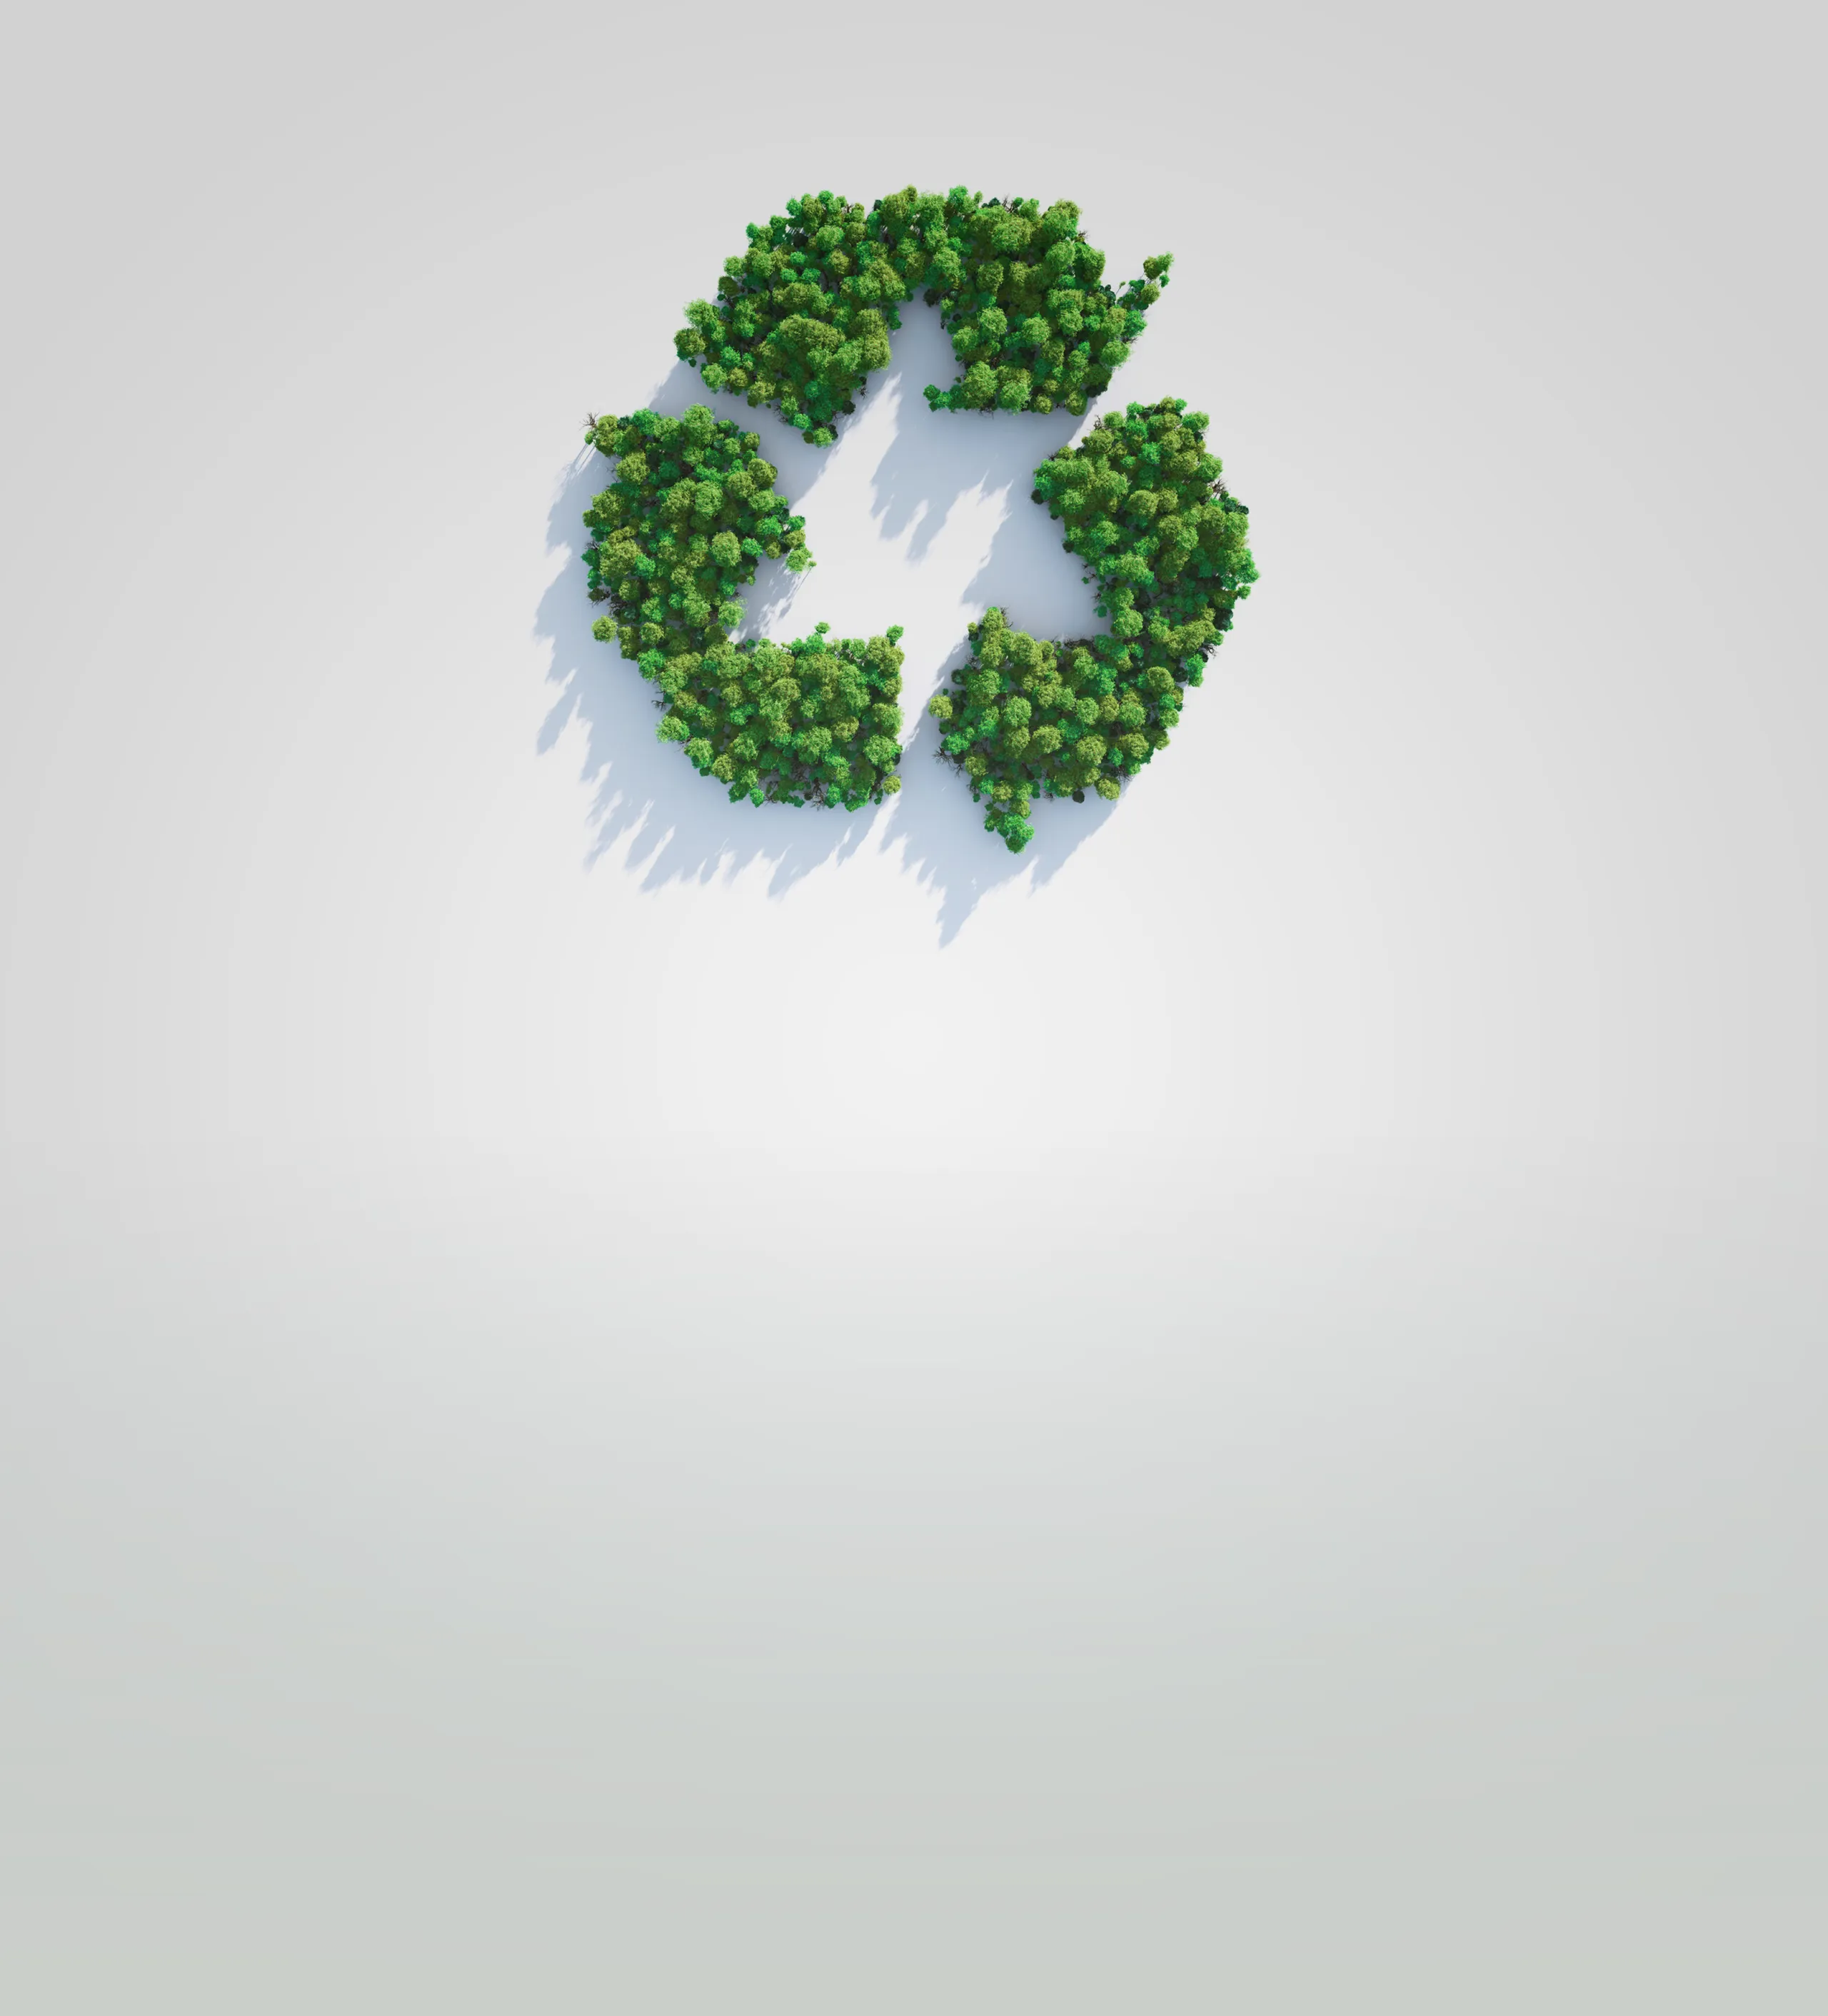 Artistic design of recycling symbol with trees